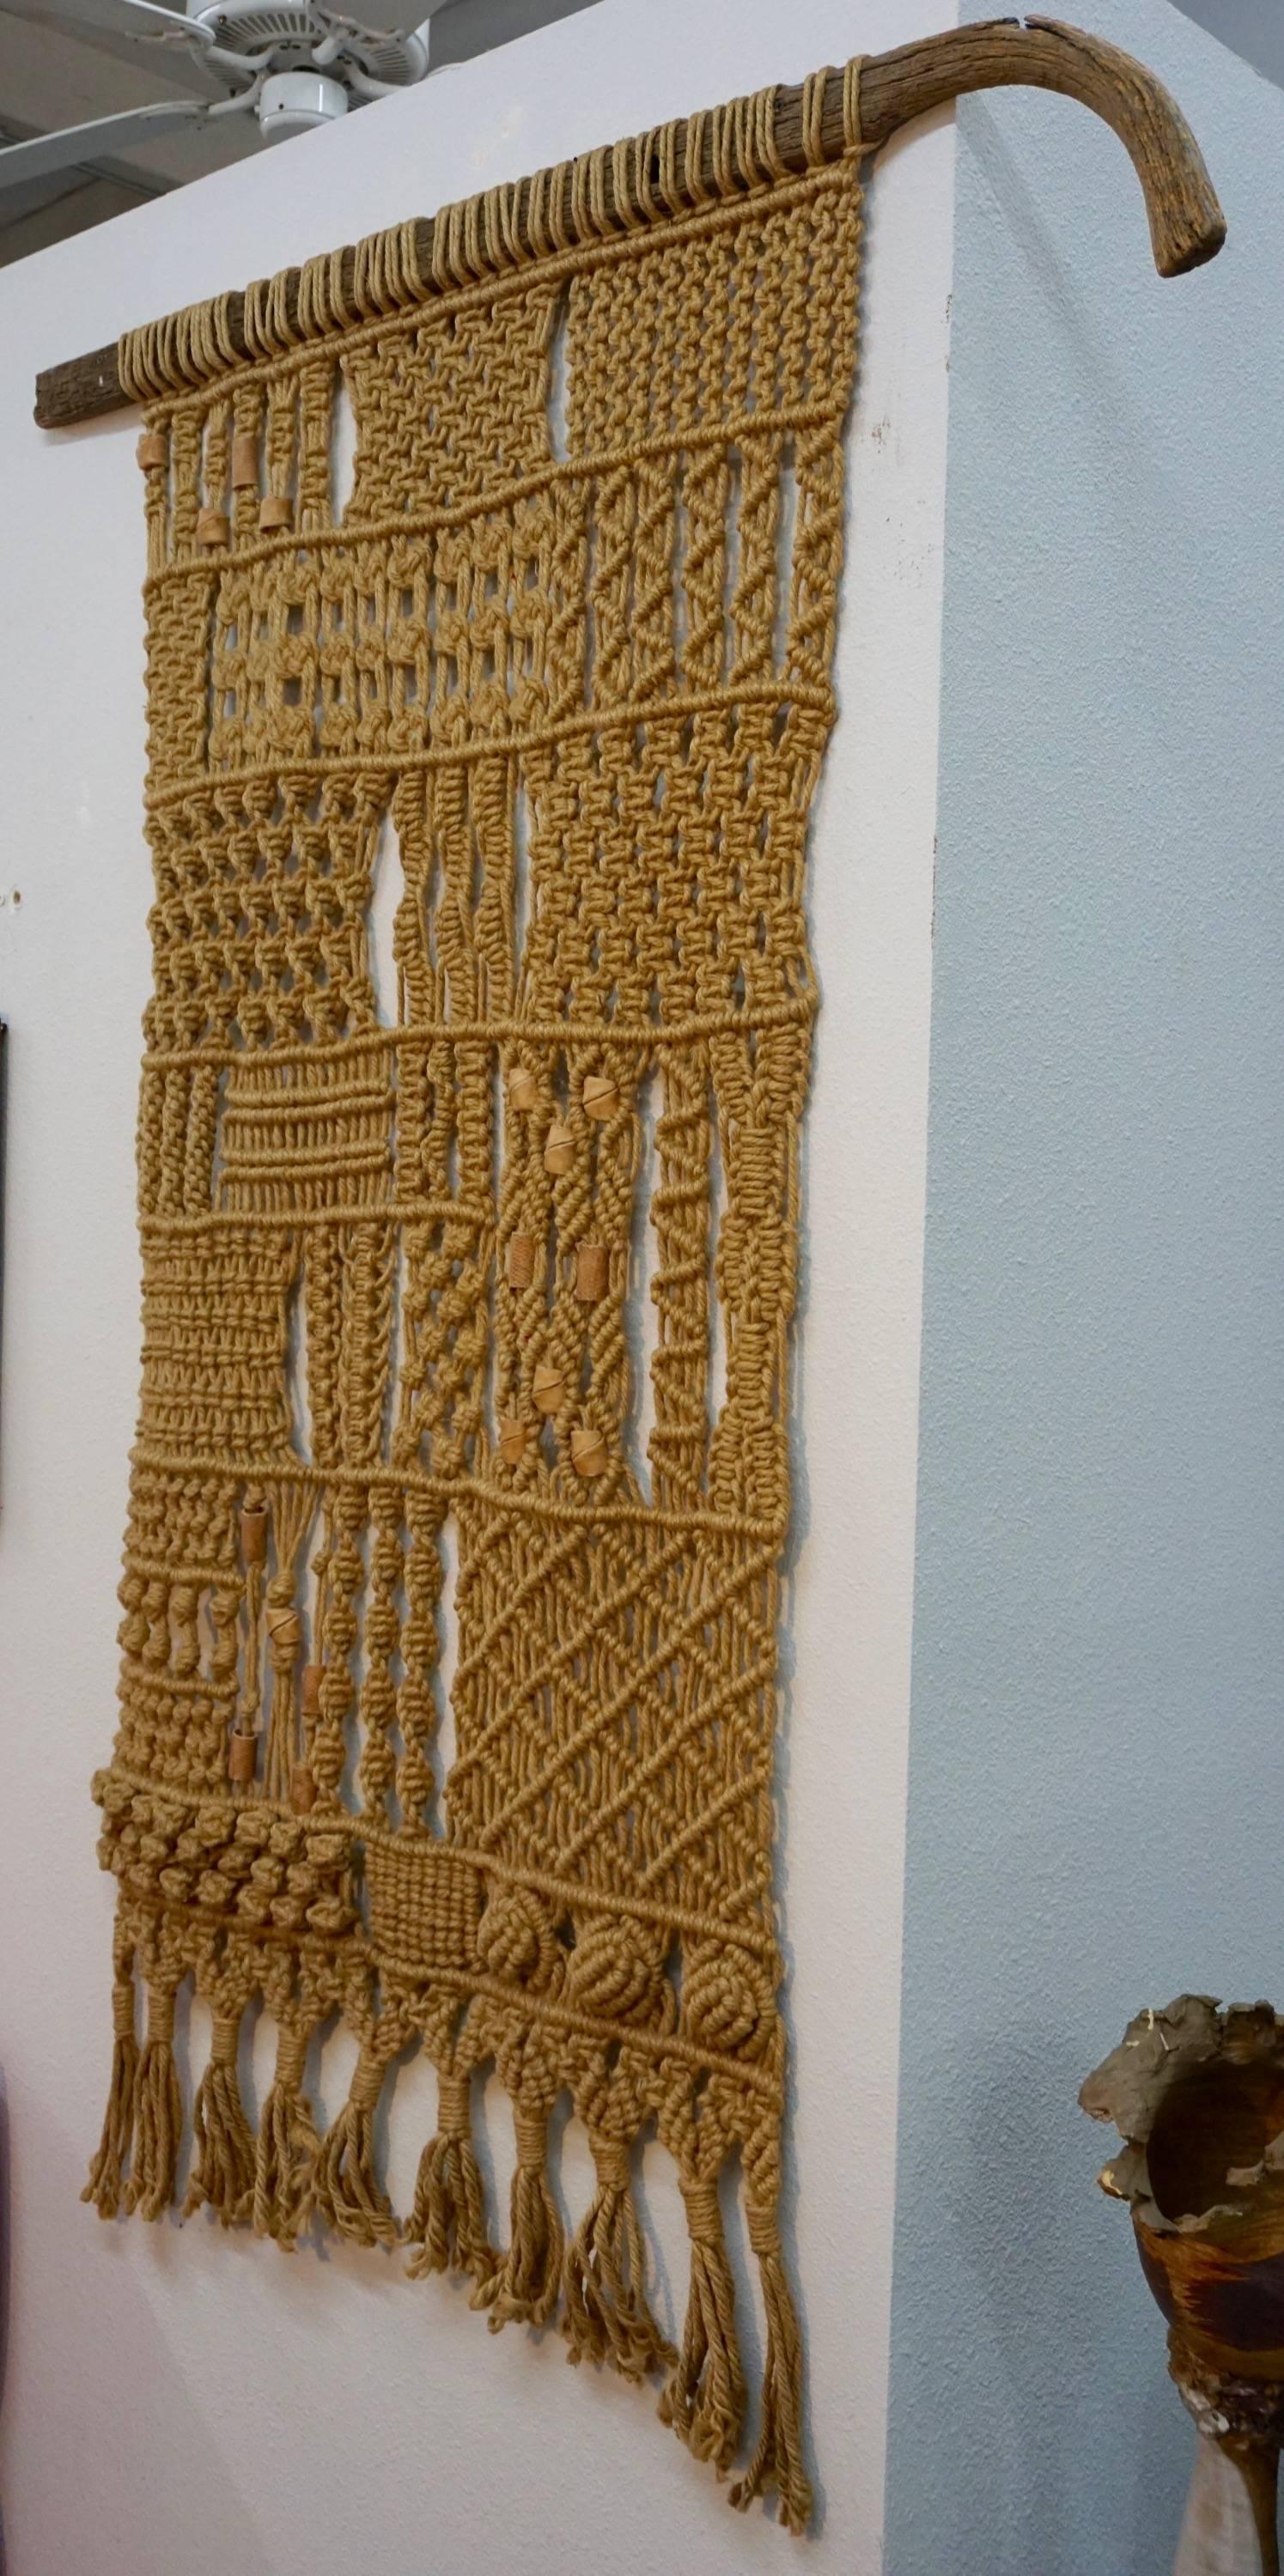 Wall hanging hemp/jute macrame mounted on a weathered plow handle with incorporated ceramic beads.